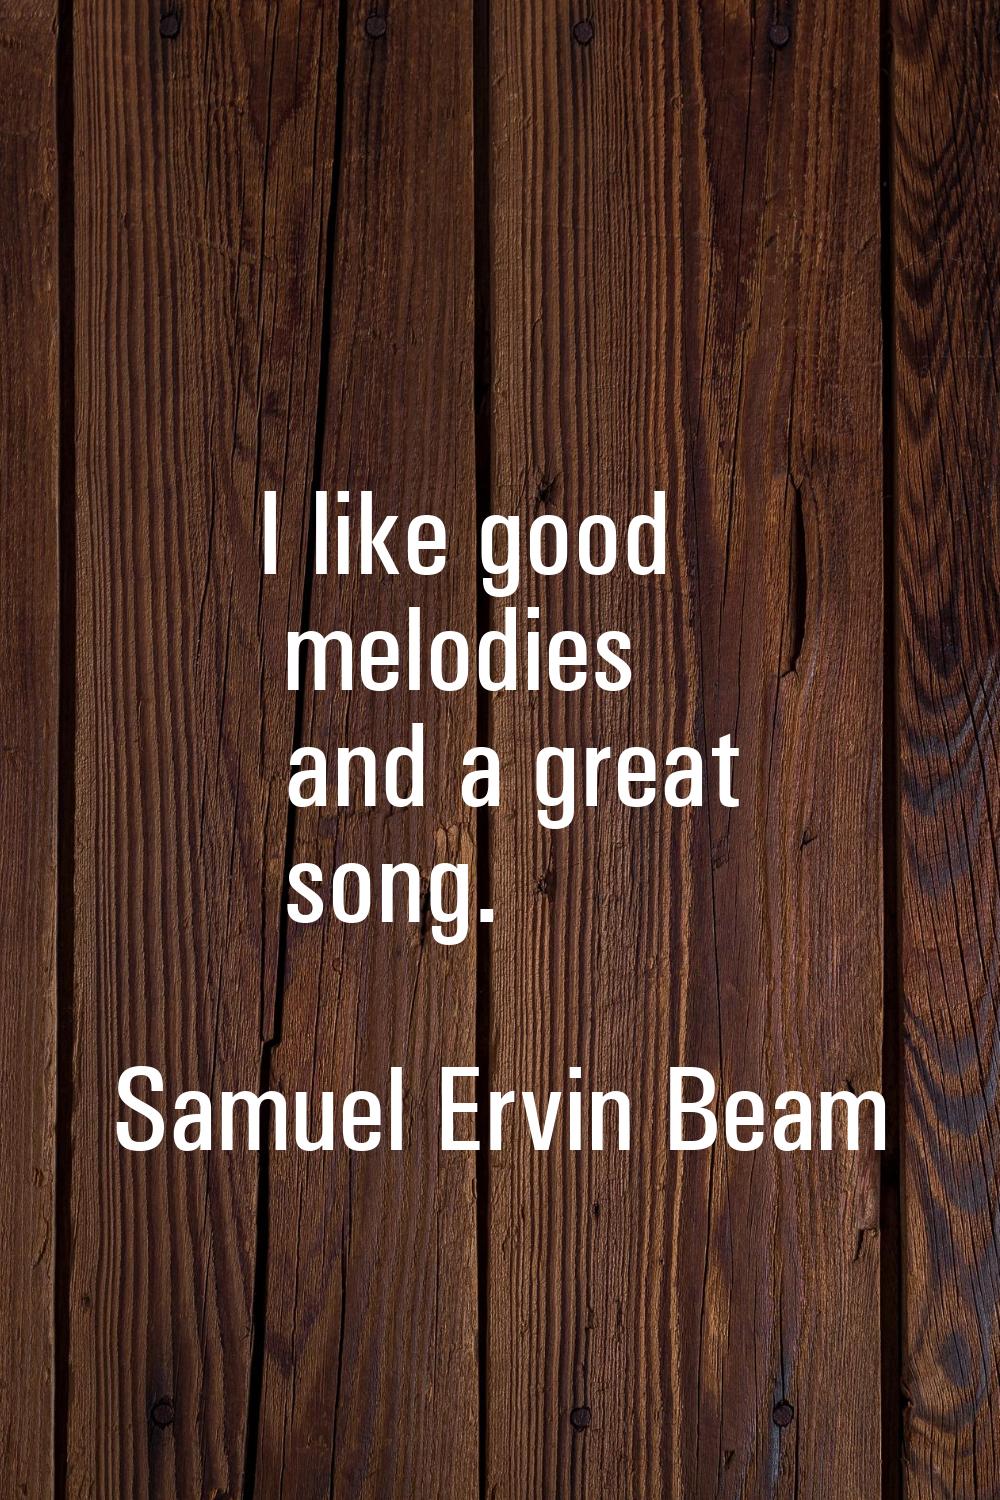 I like good melodies and a great song.